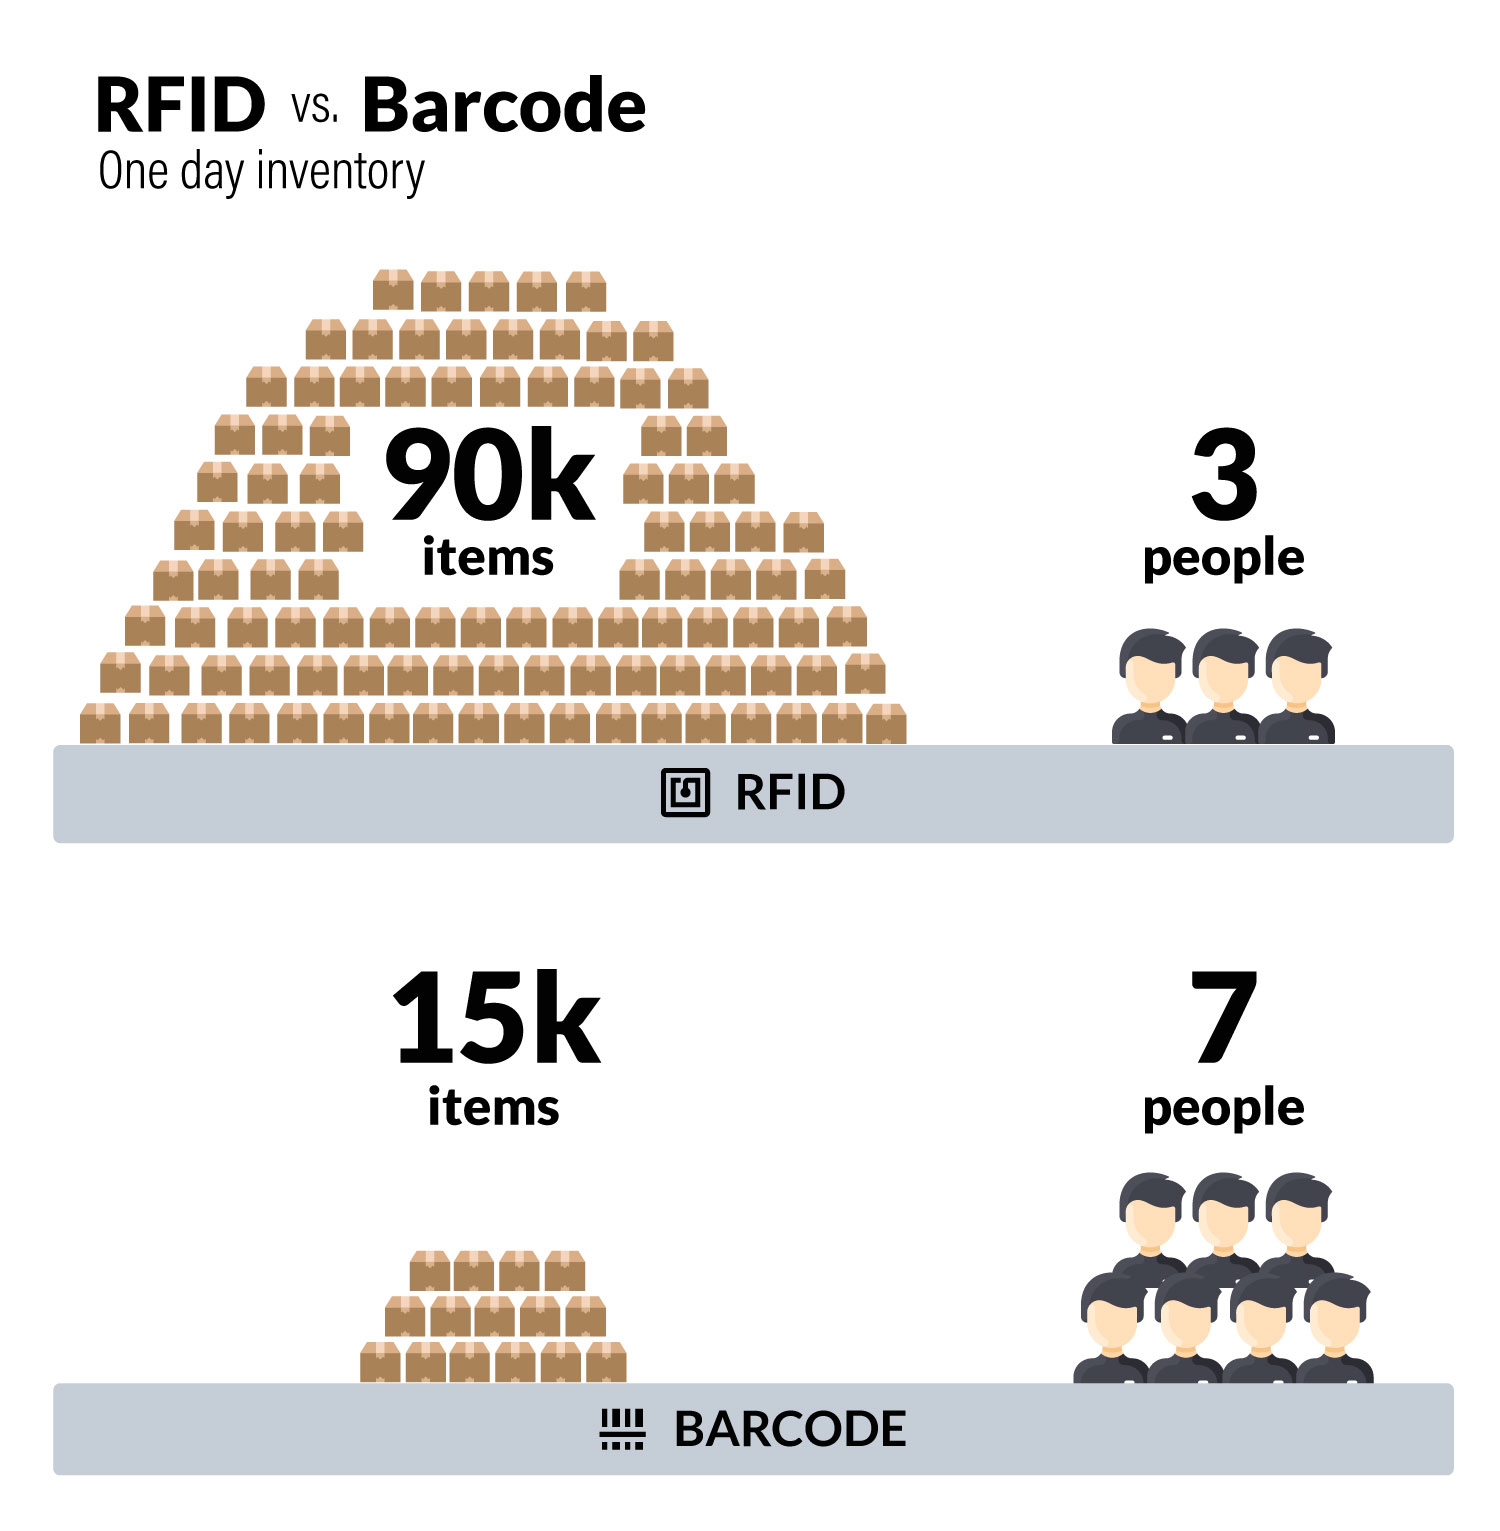 RFID inventory vs barcode inventory